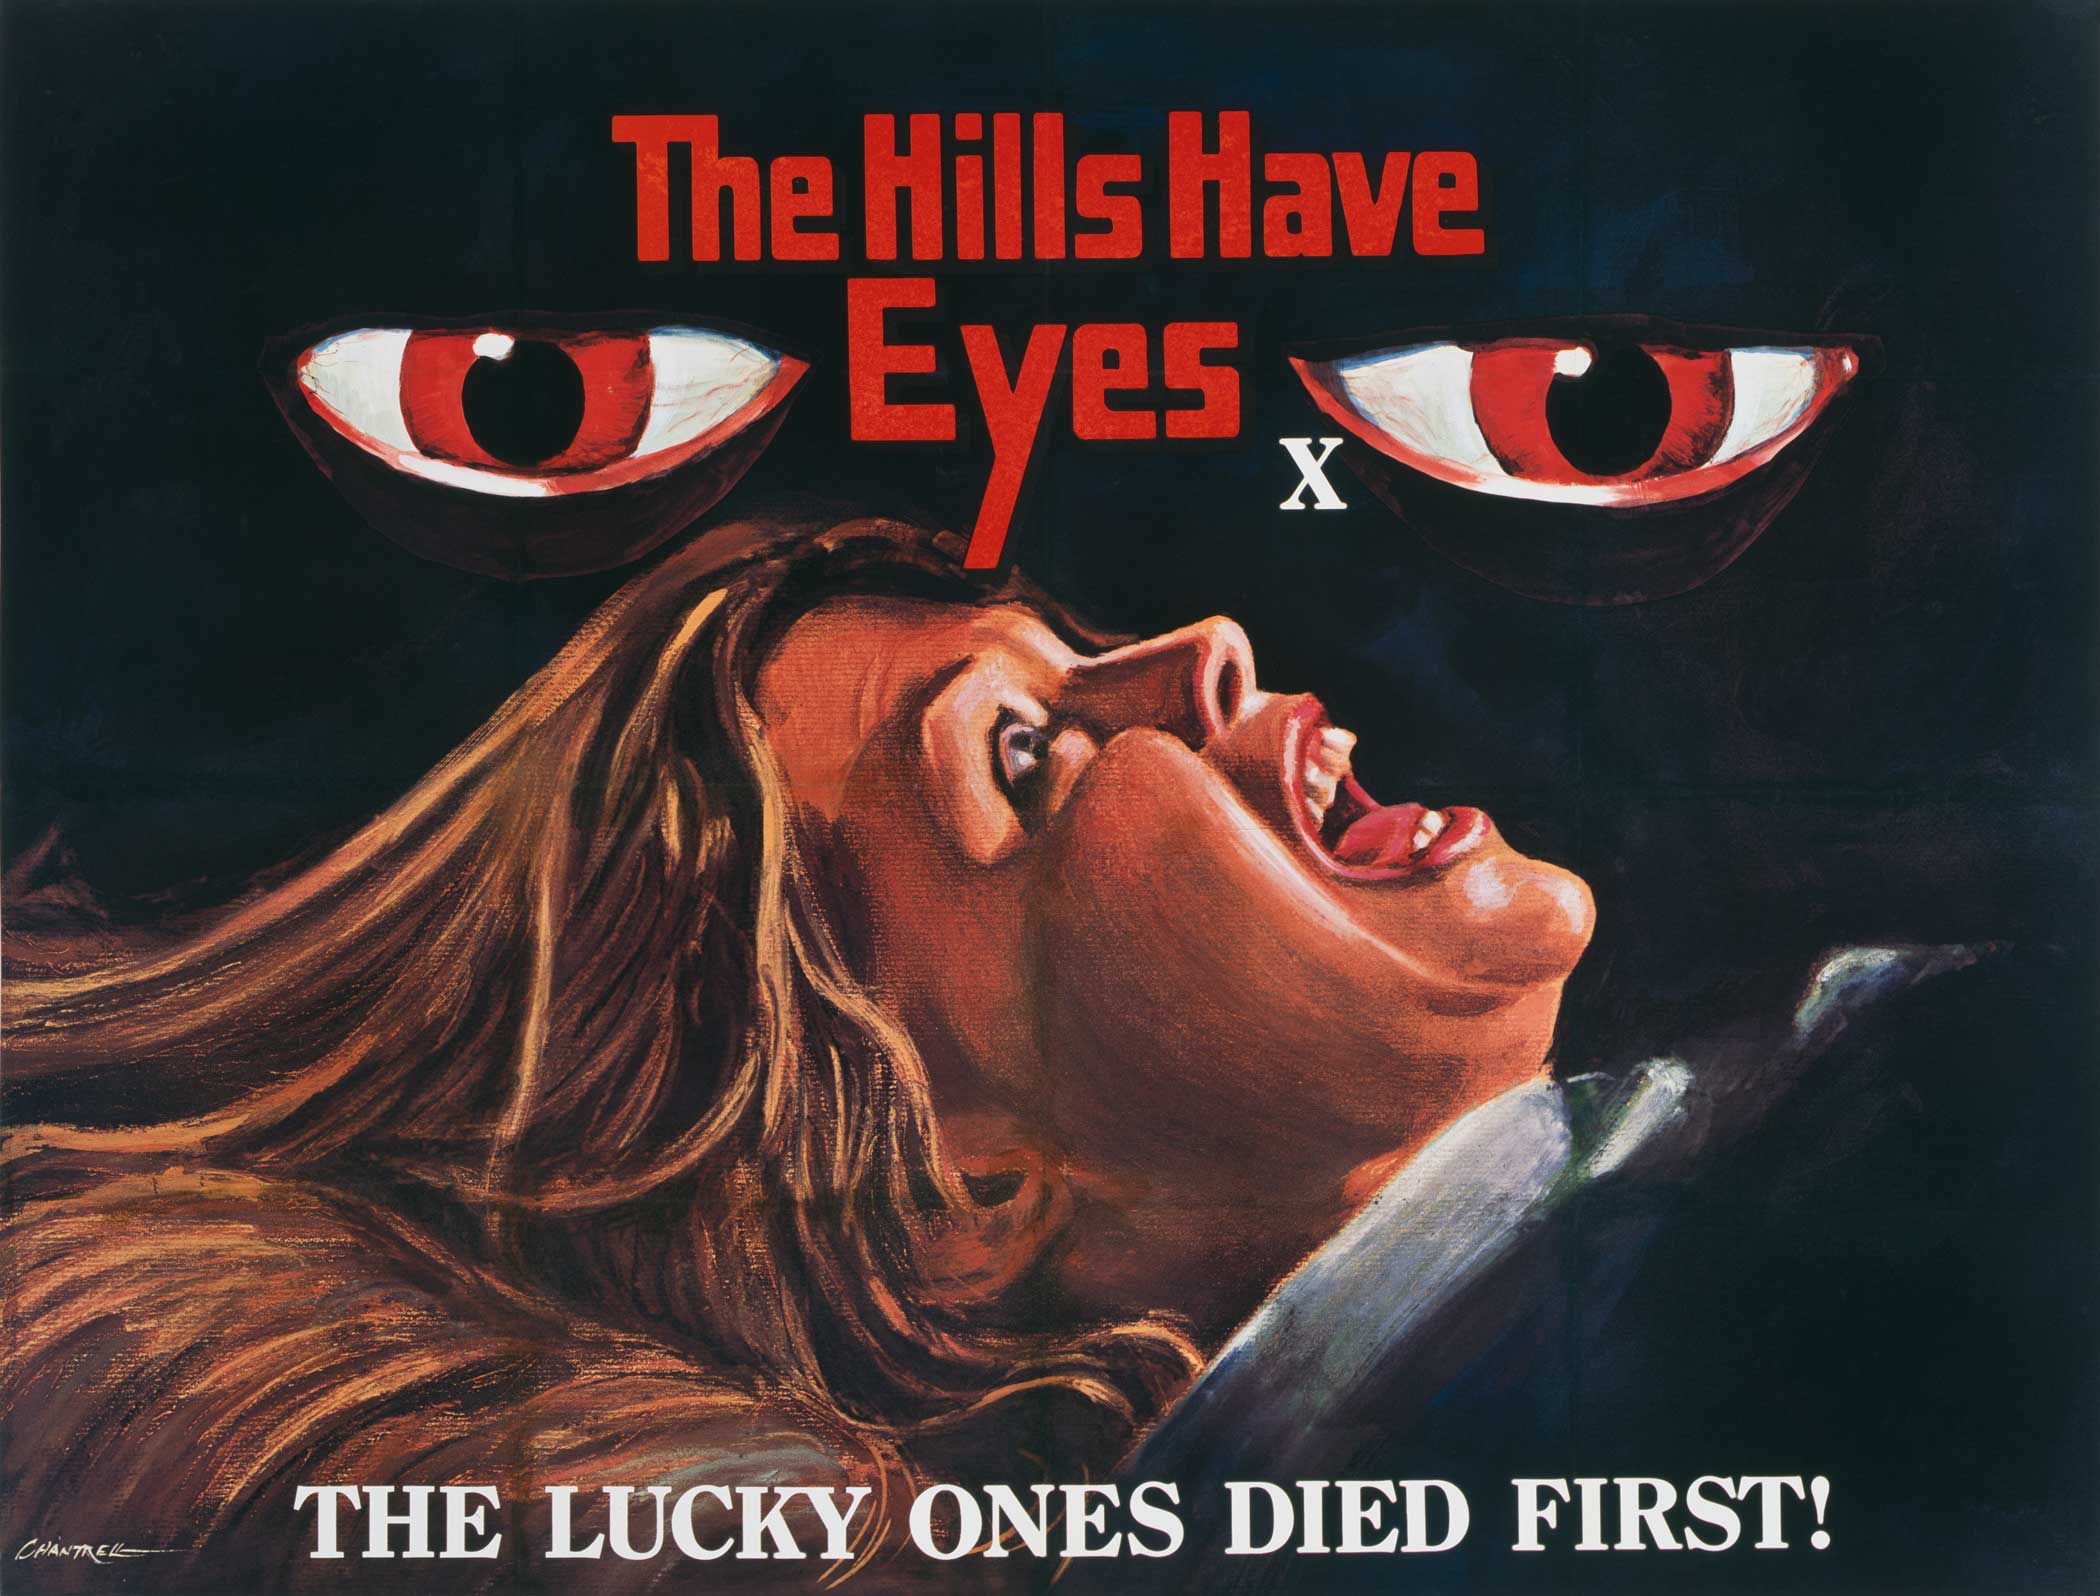 The Hills Have Eyes, 1977  The film was made as a contemporary retelling of the Sawney Bean story. Bean was known as the head of a 48-member clan of cannibals, and was reportedly executed for the killing of roughly 1,000 people in 16th century Scotland.